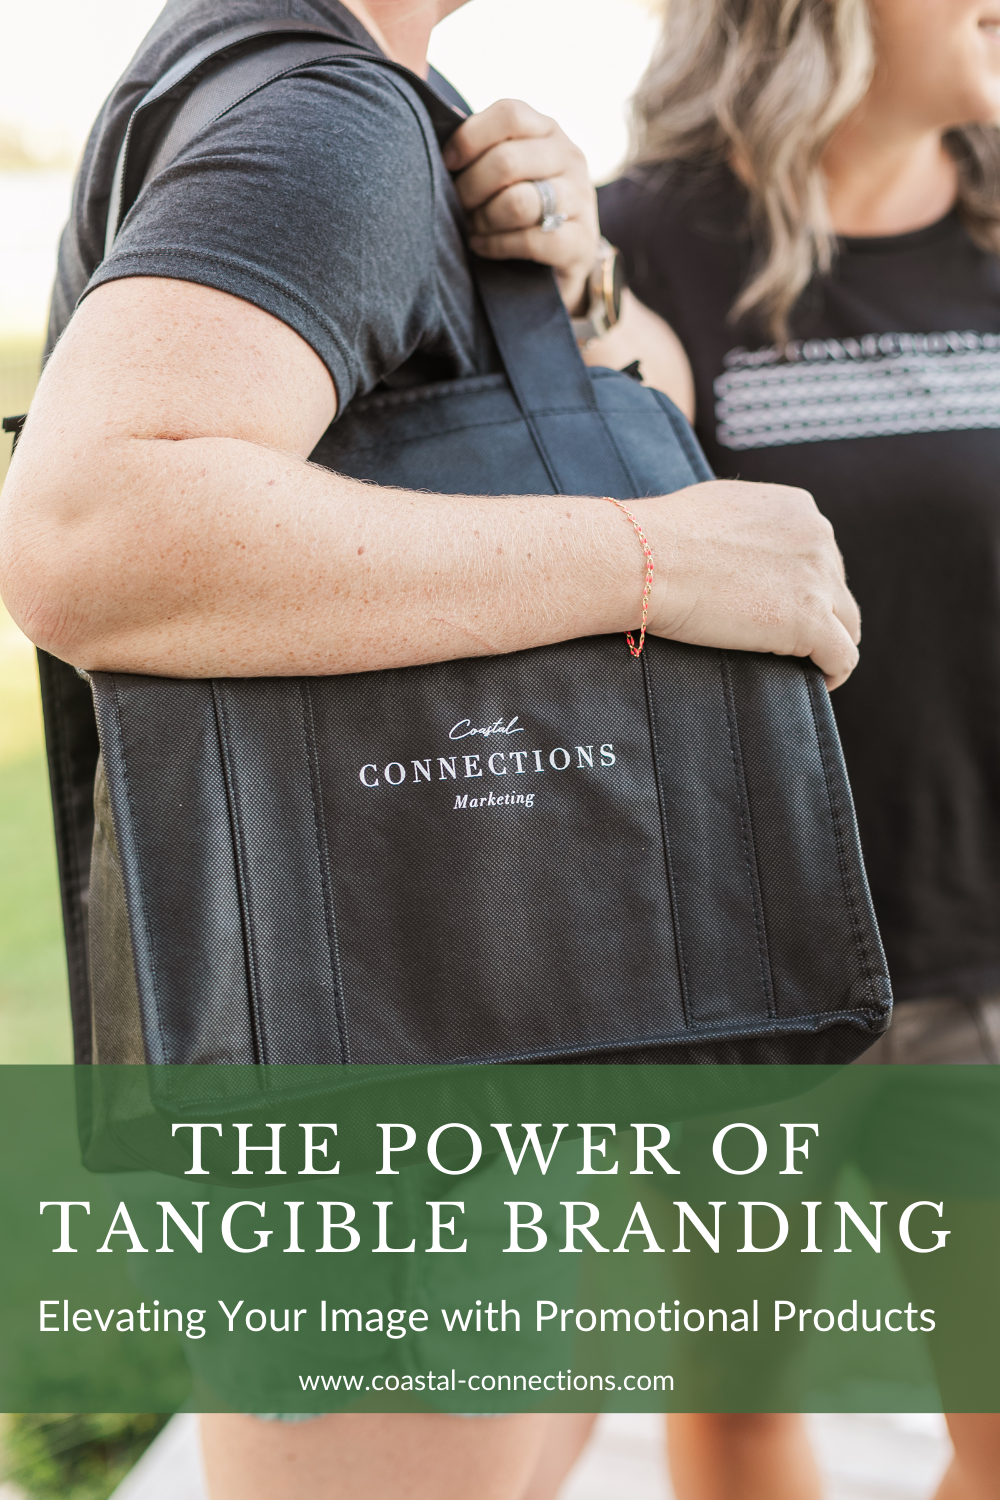 Branded Tote Bag Coastal Connections Marketing